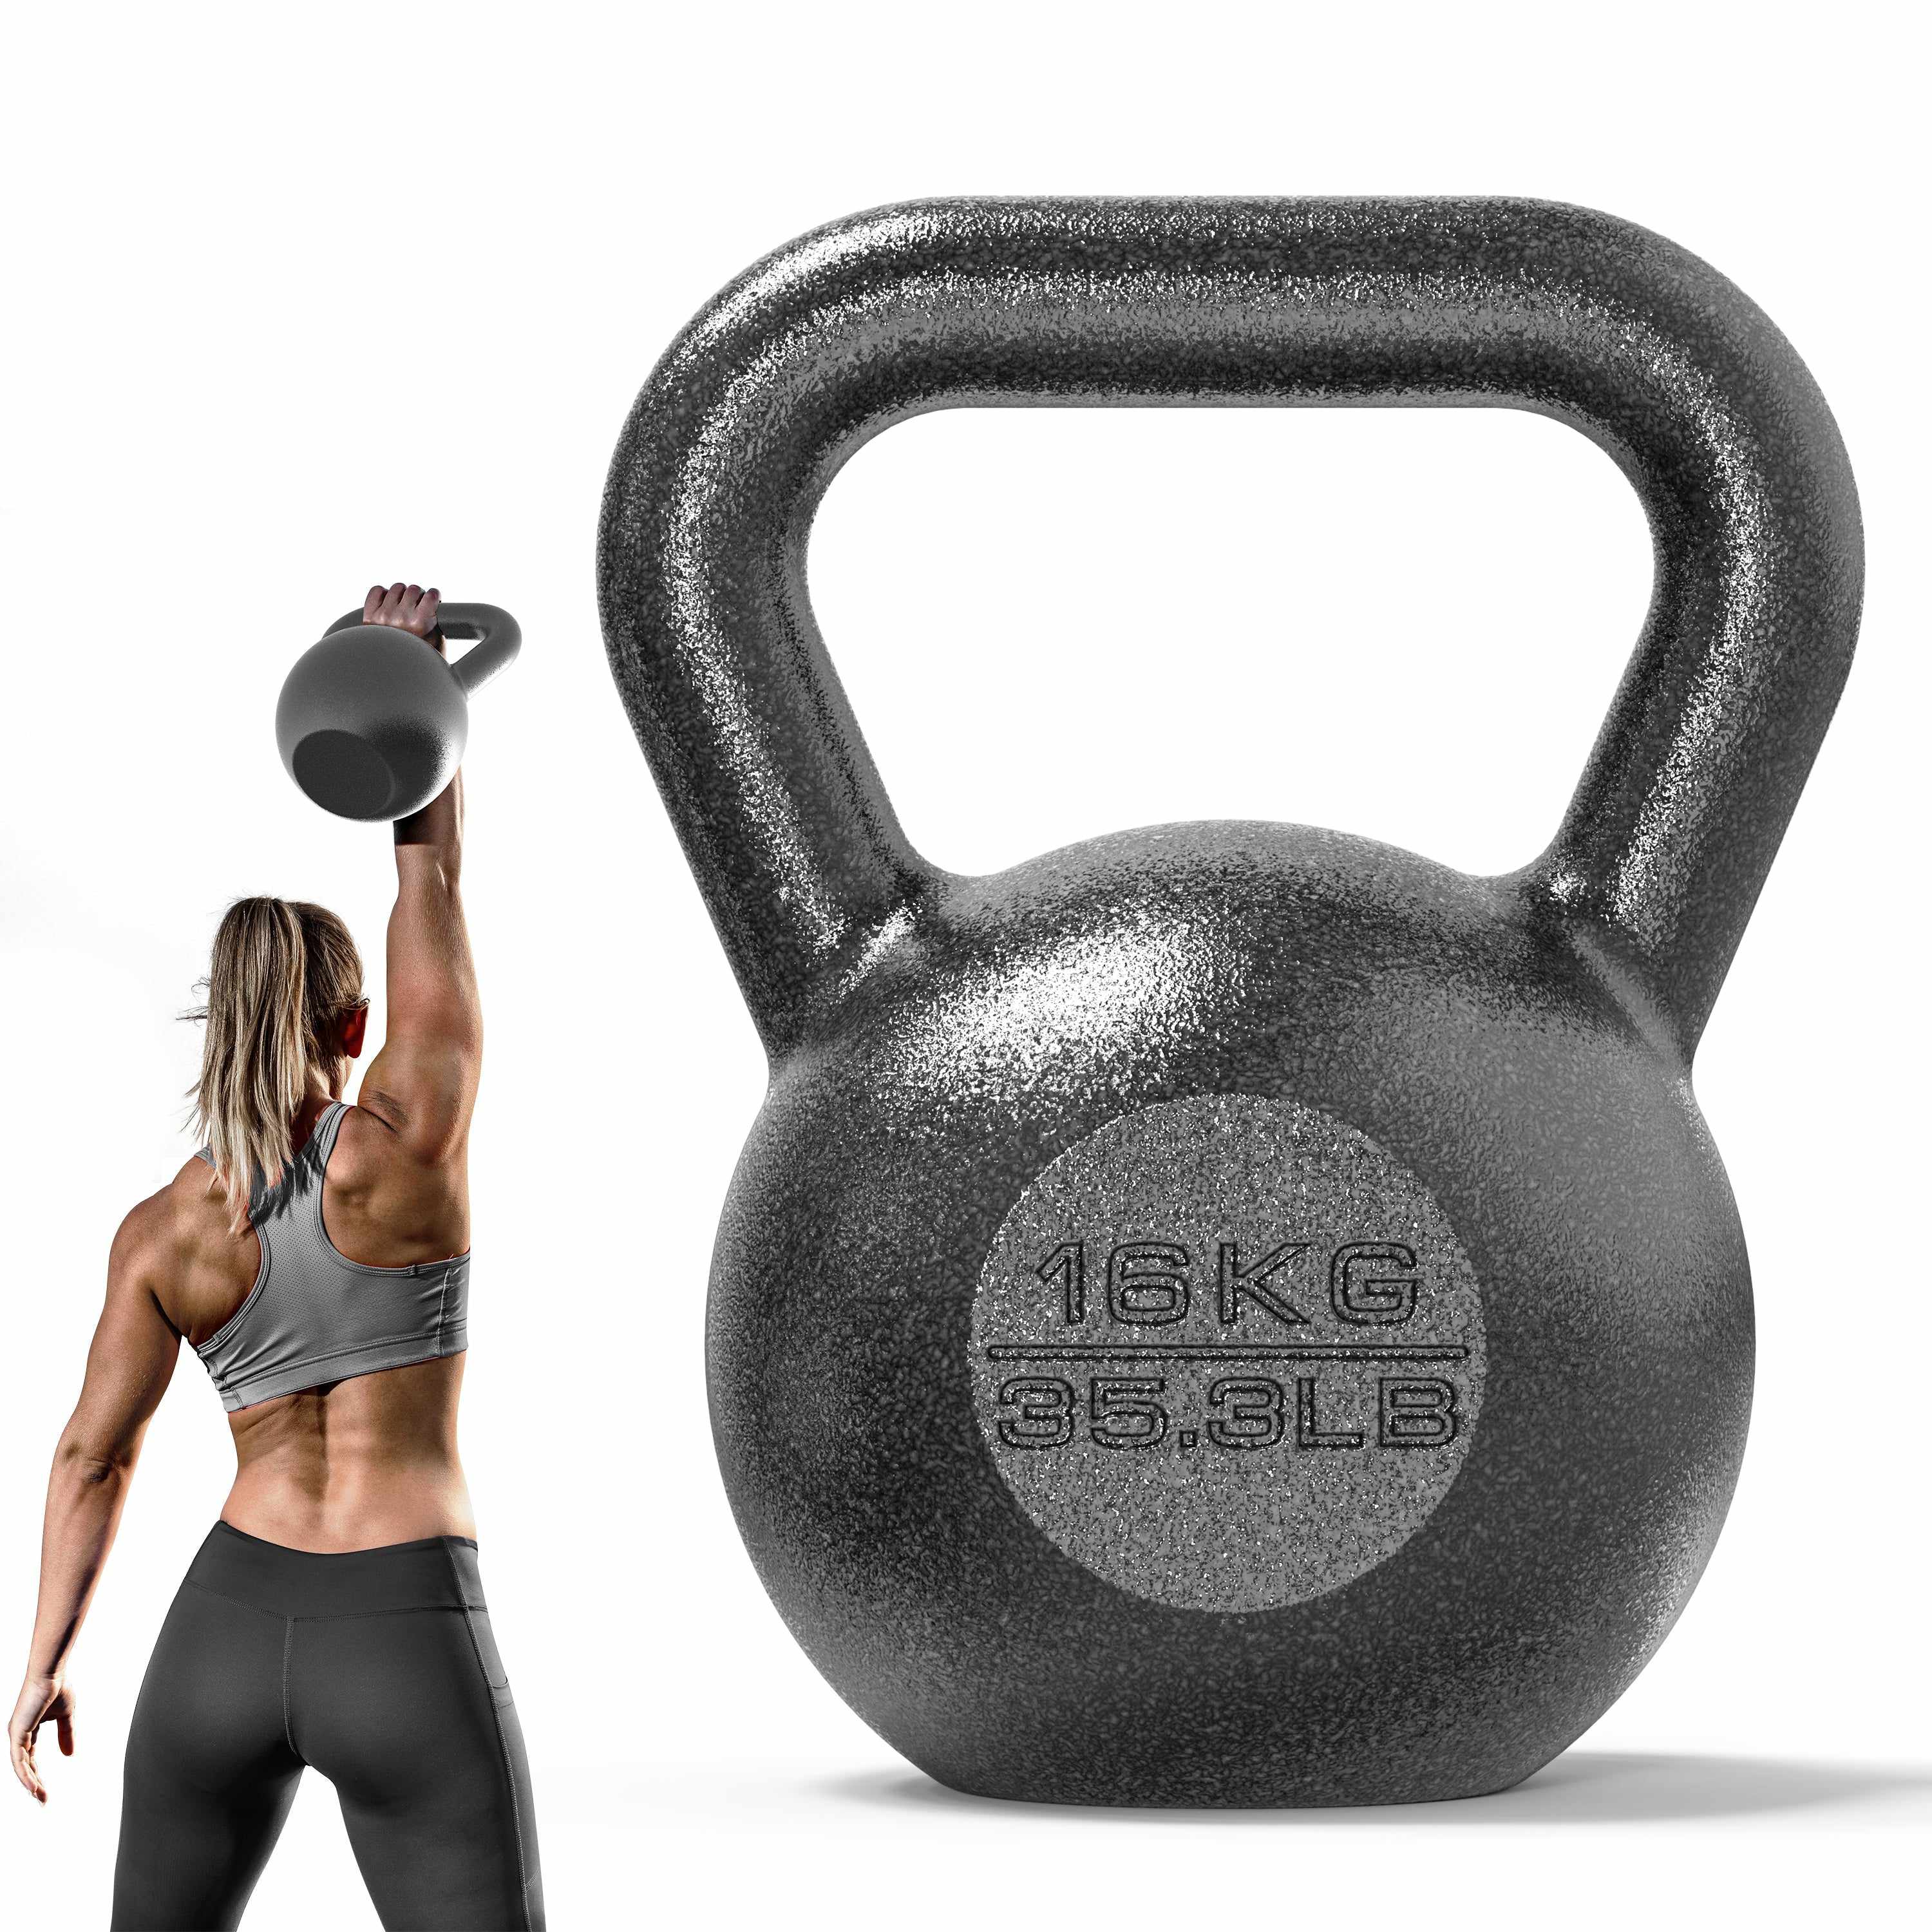  PRISP Competition Kettlebell Weight 24kg - Pro